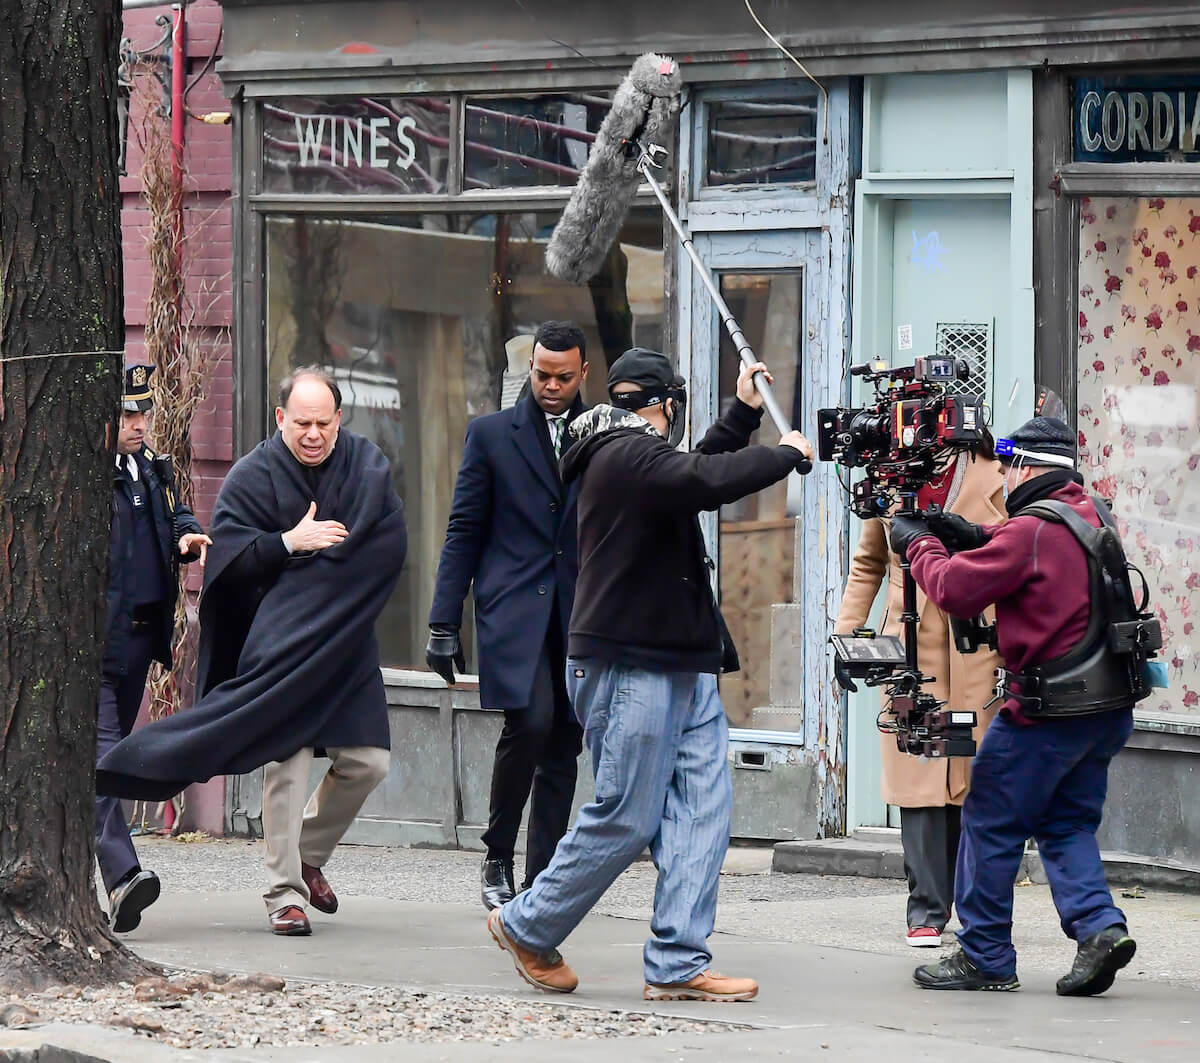 Actors filming a scene of 'Law and Order: SVU' with camera person in front of them and a microphone being held over them